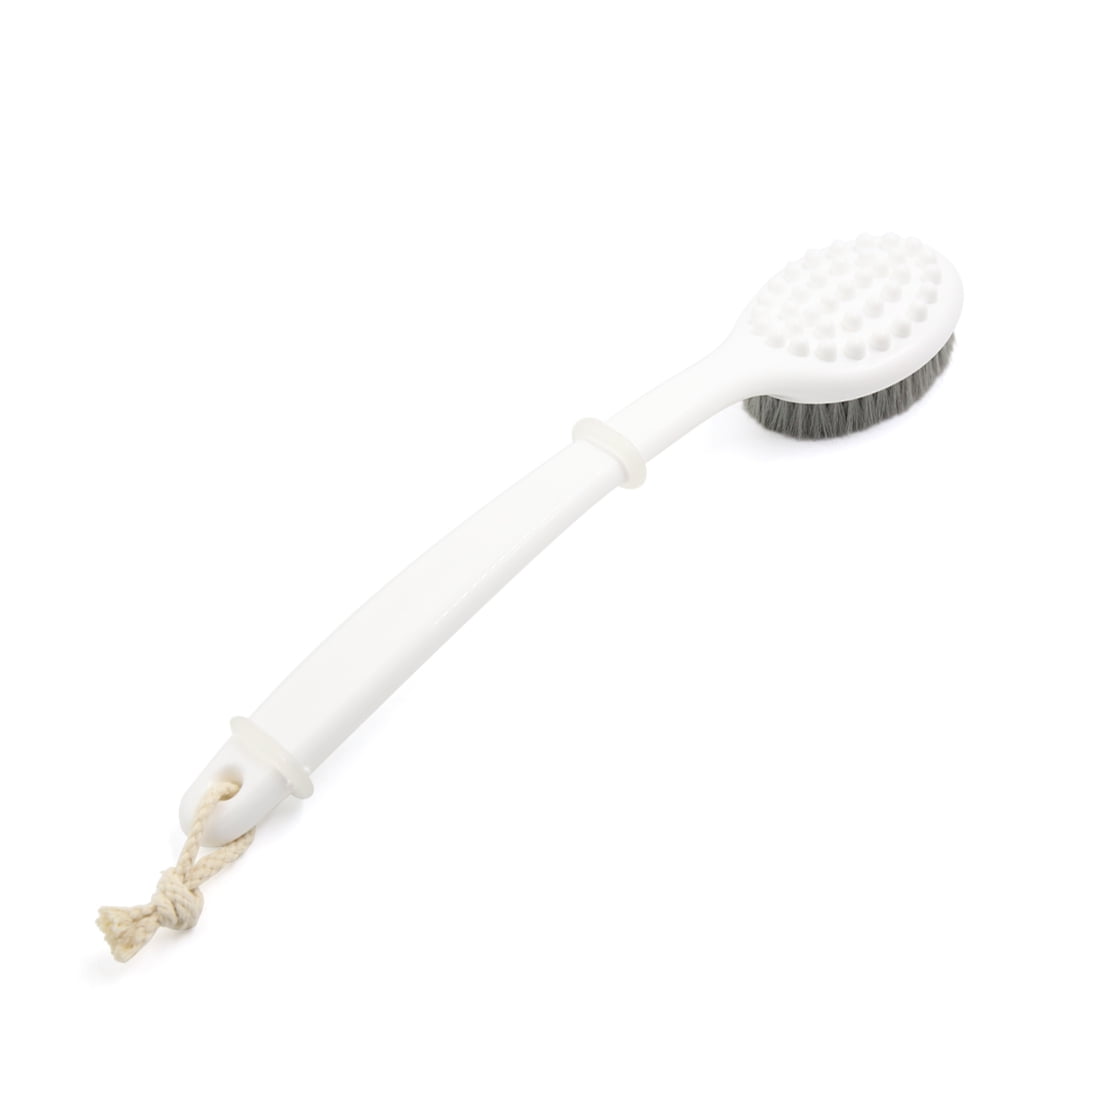 LYIGEOL 27.5 Back Bath Brush with Long Curved Long Handle Shower